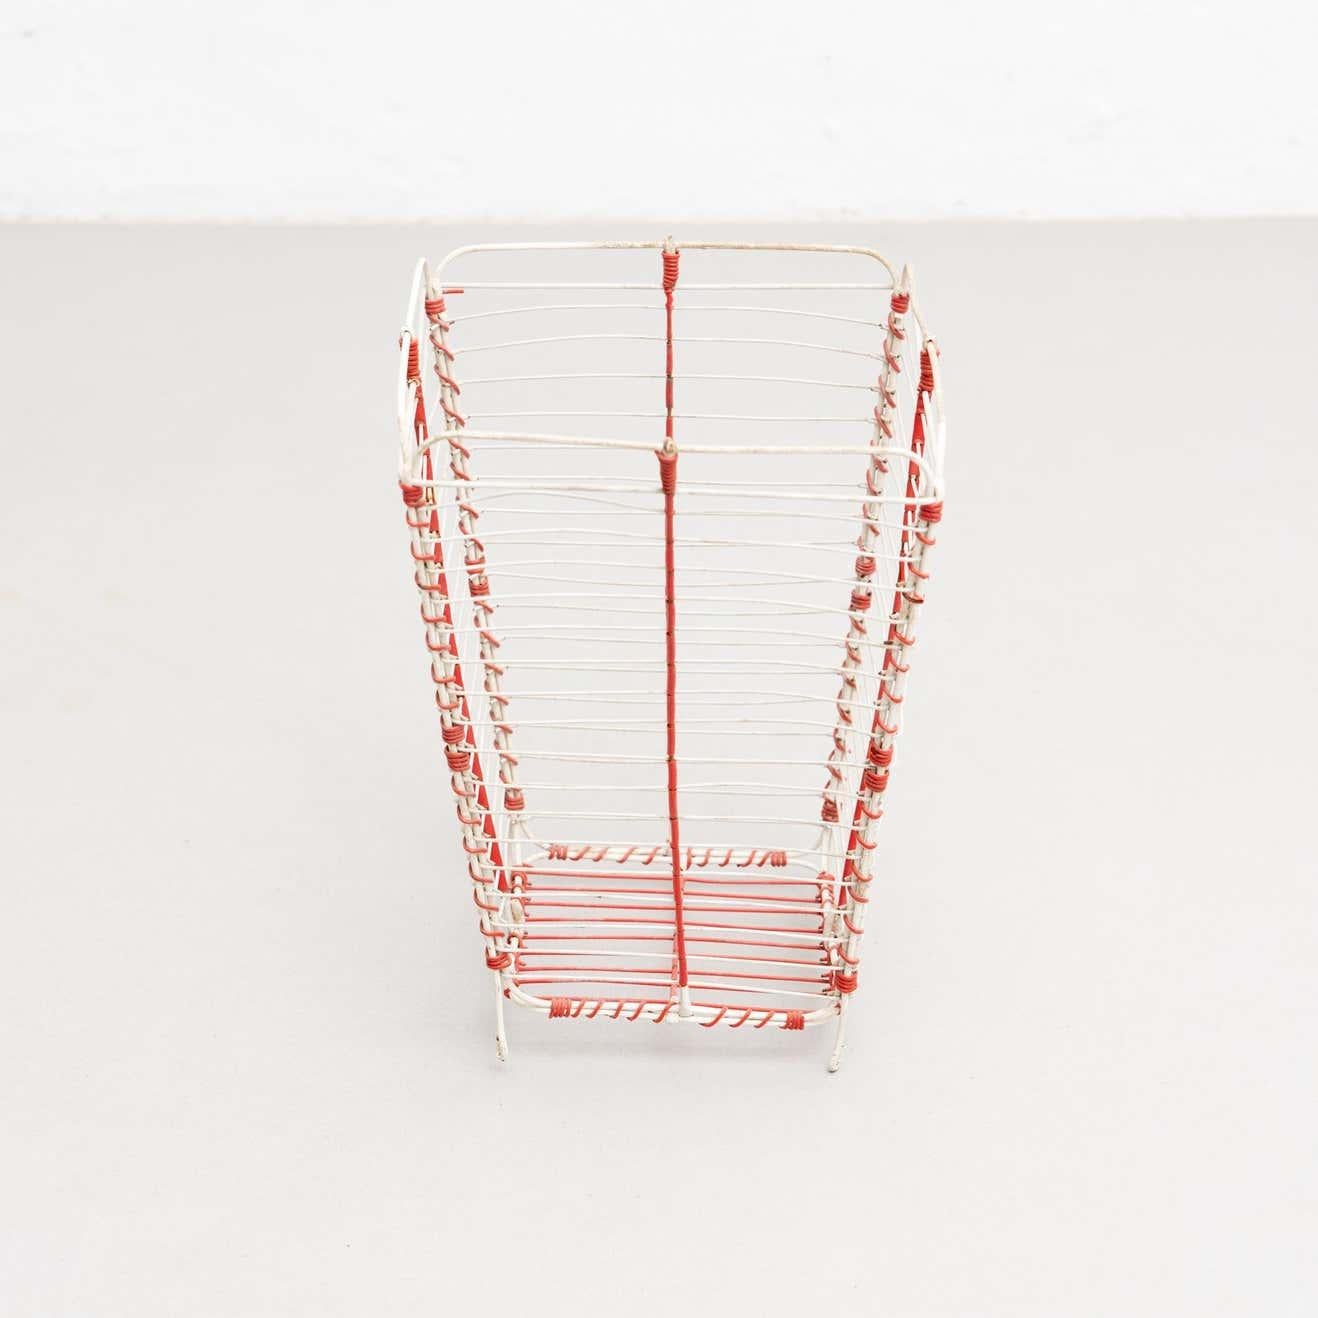 Metal paper bin made by wire woven in a classic cross-hatched pattern completed by a solid ring. 
Unknown manufacturer, France,
circa 1940

Materials:
Metal

In original condition, with minor wear consistent of age and use, preserving a